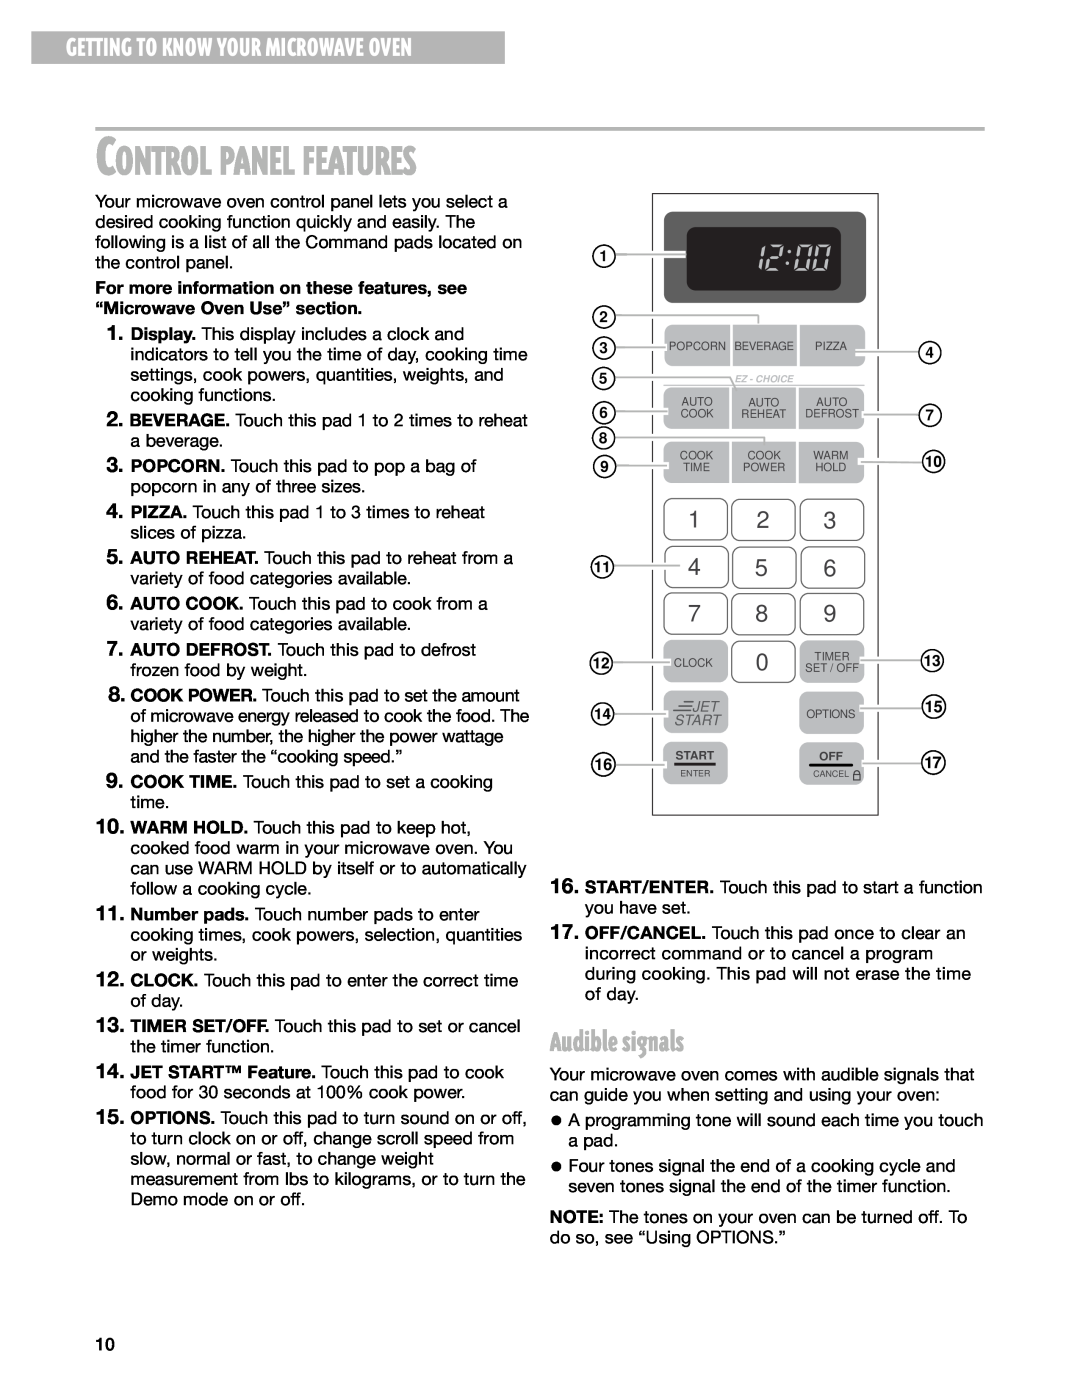 Whirlpool MT4110SK installation instructions Control Panel Features, Audible signals, Getting To Know Your Microwave Oven 